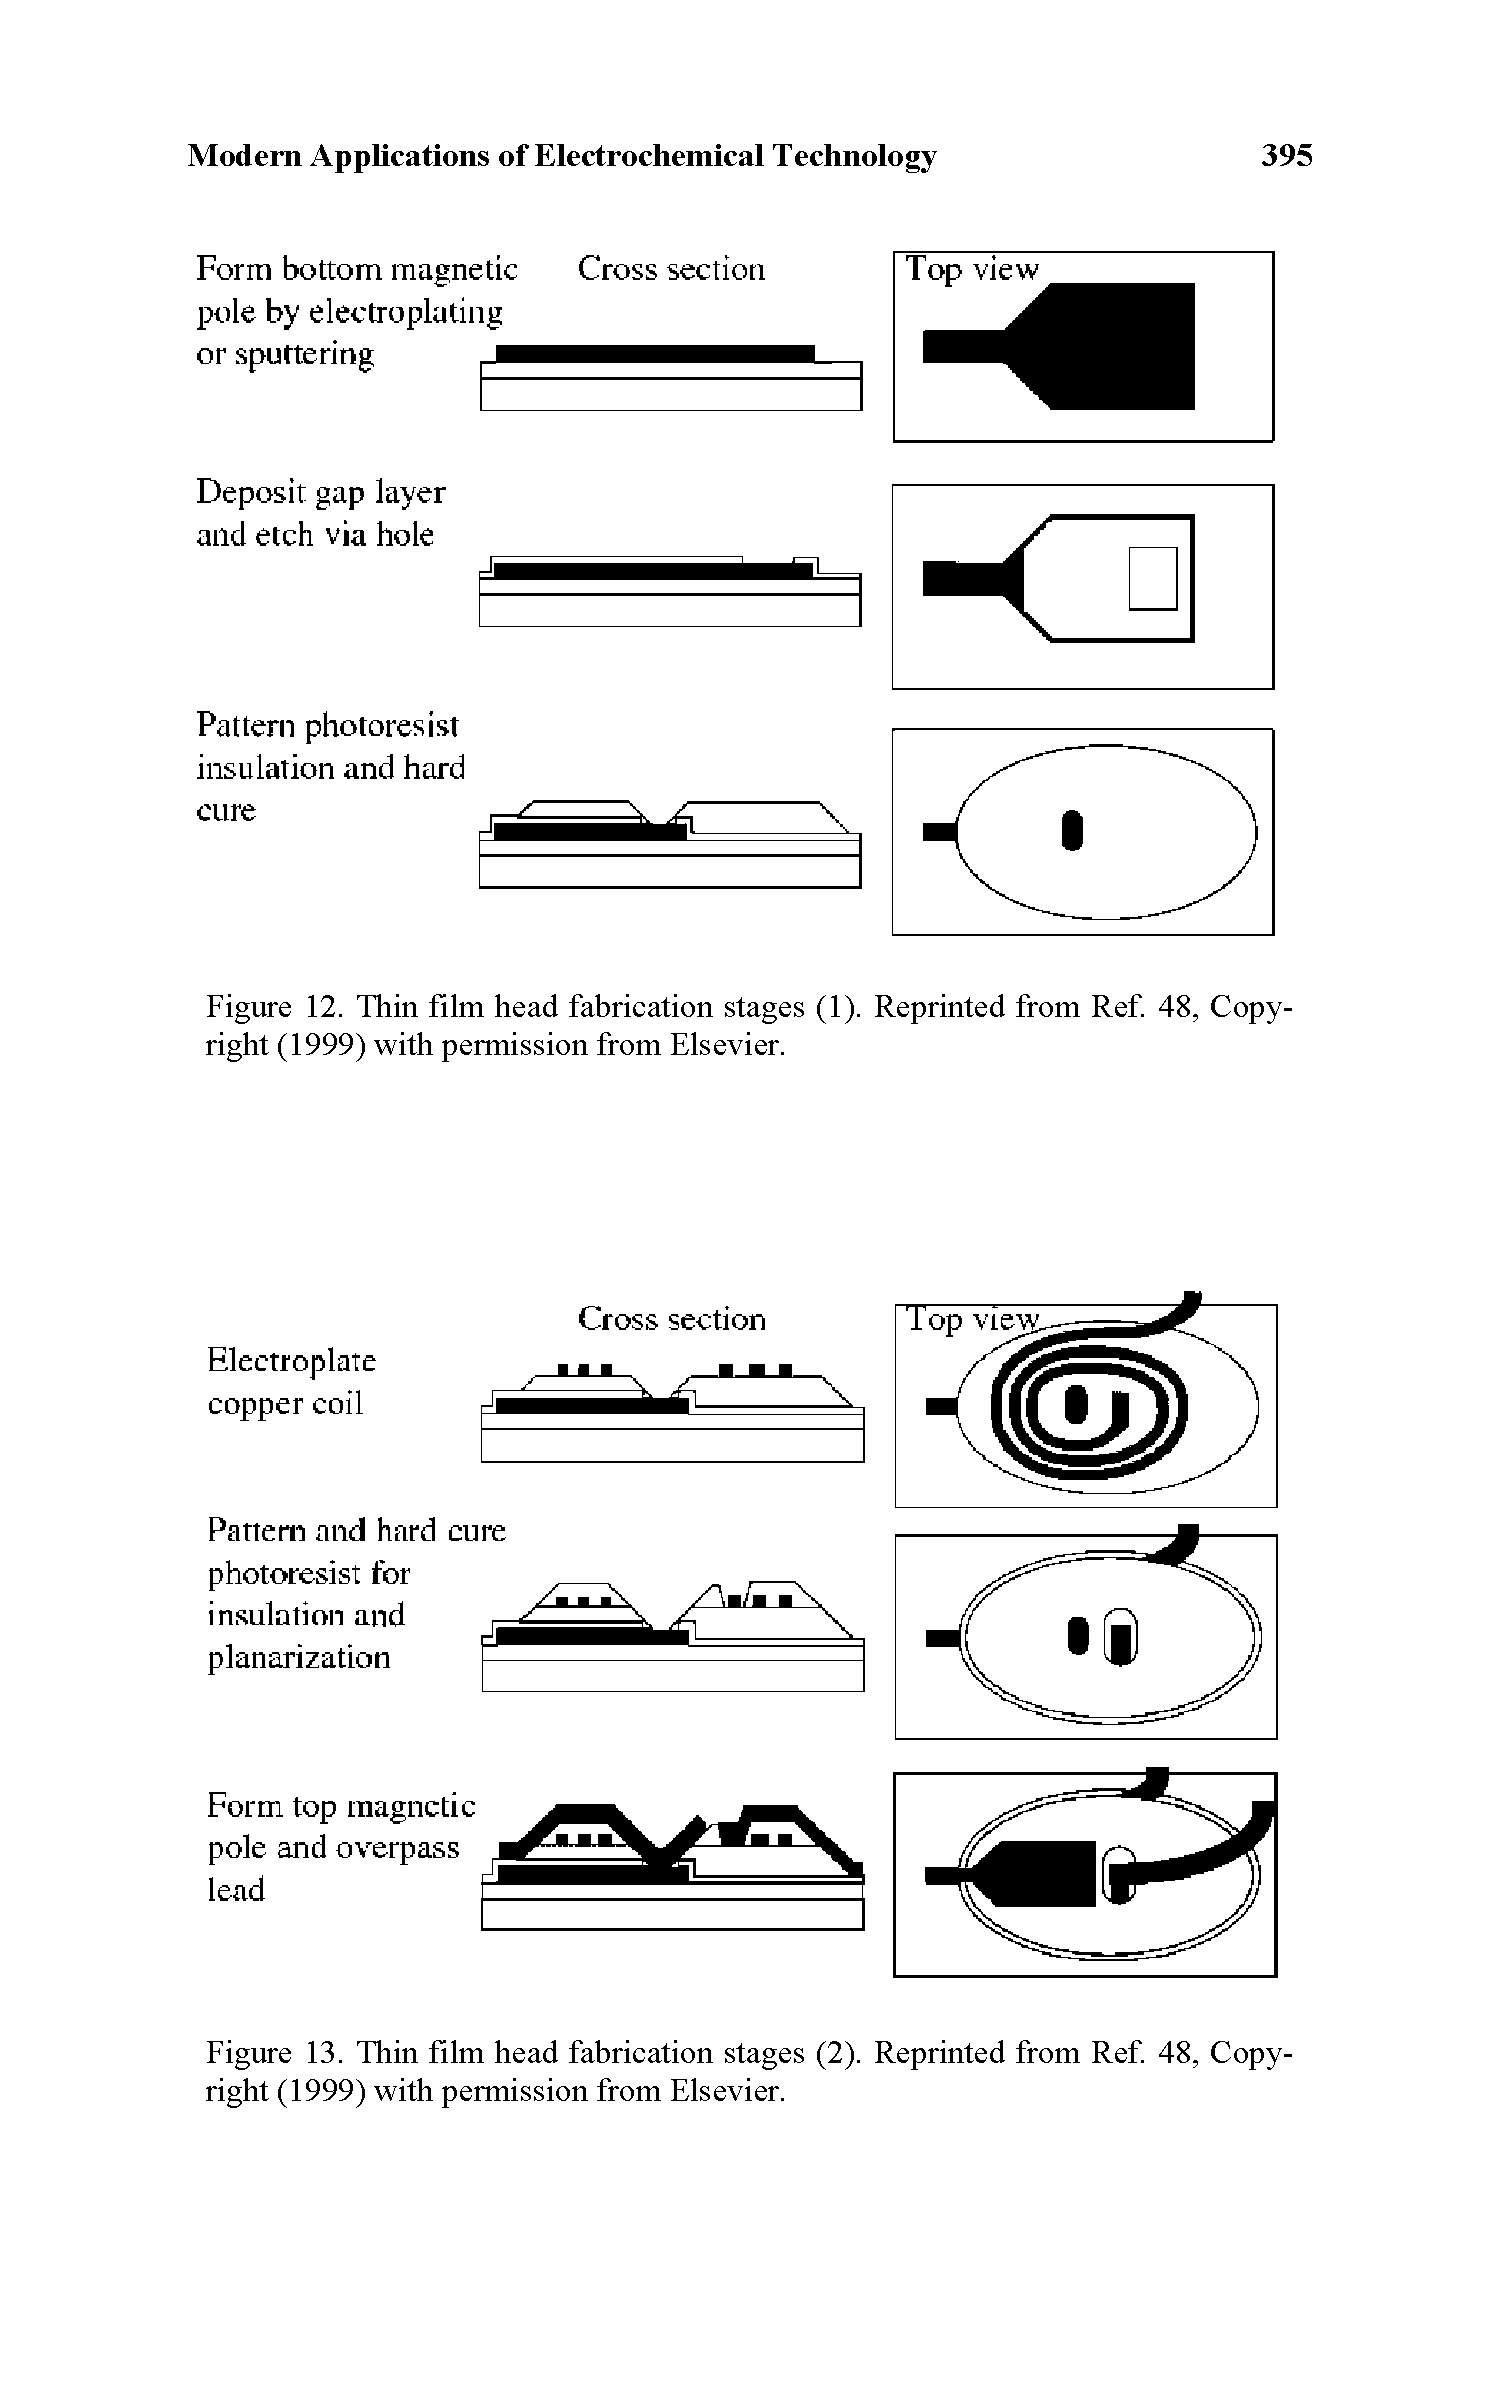 Figure 12. Thin film head fabrication stages (1). Reprinted from Ref. 48, Copyright (1999) with permission from Elsevier.